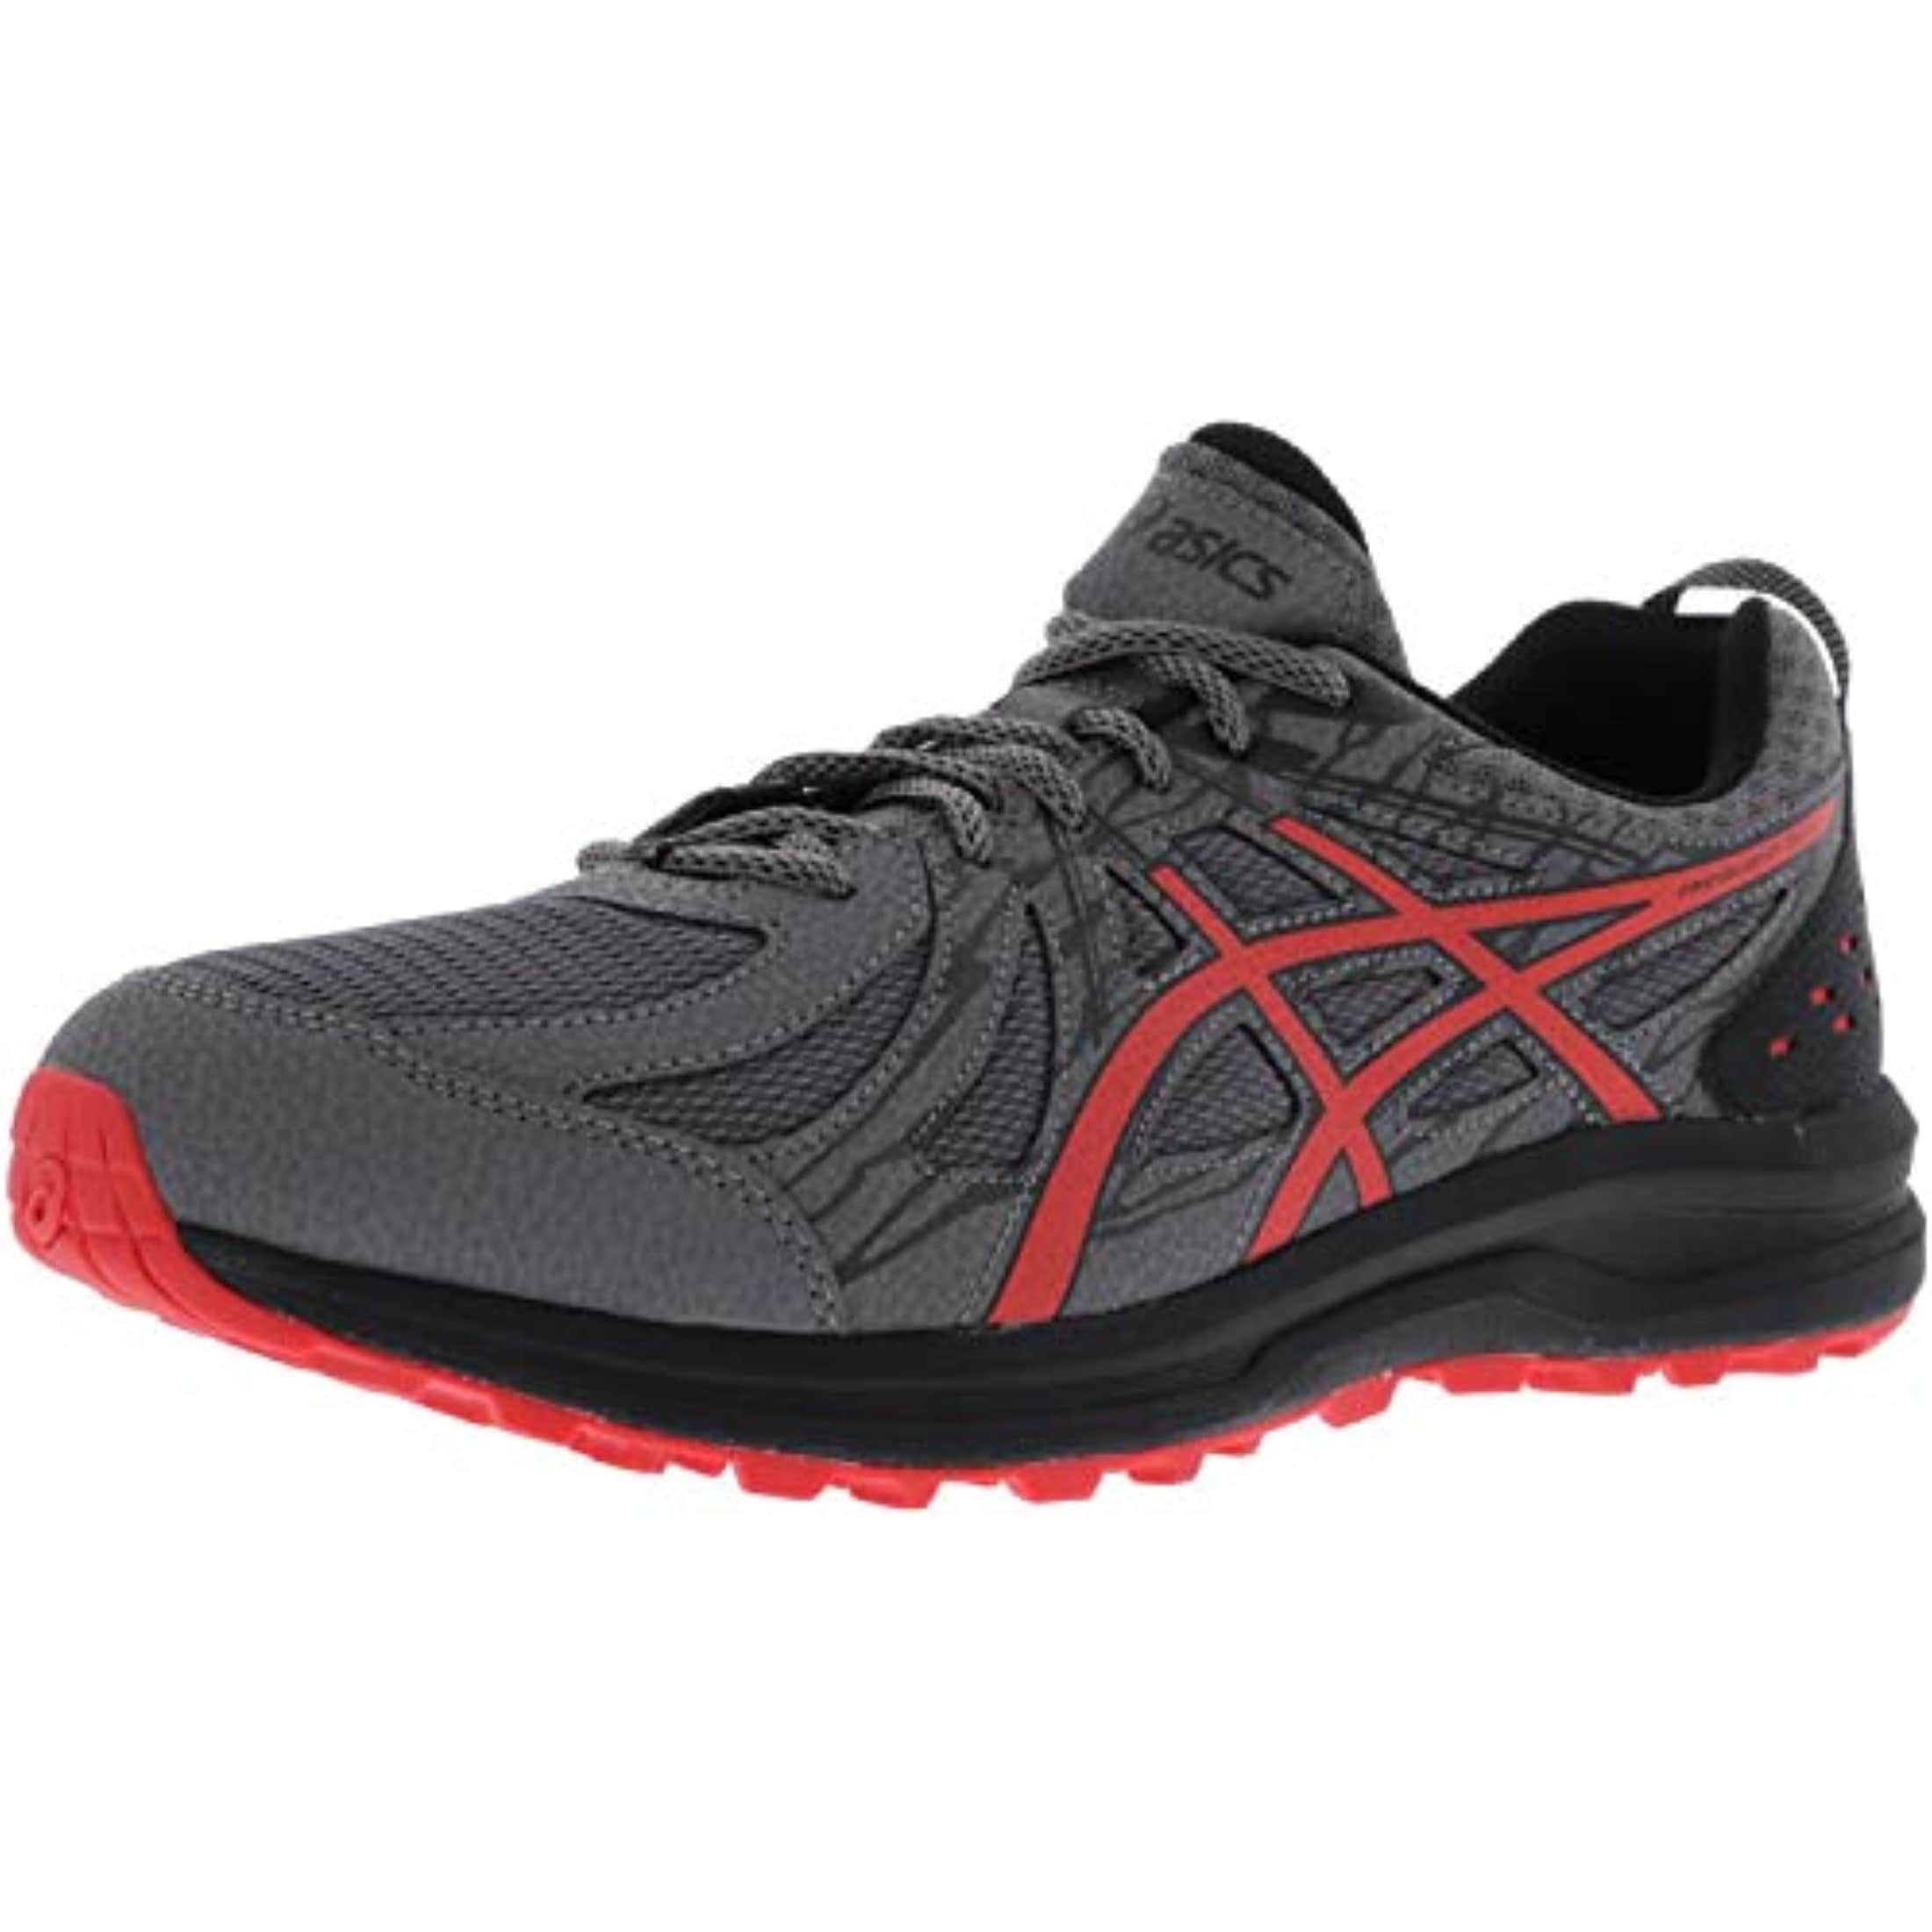 asics womens frequent trail running shoes